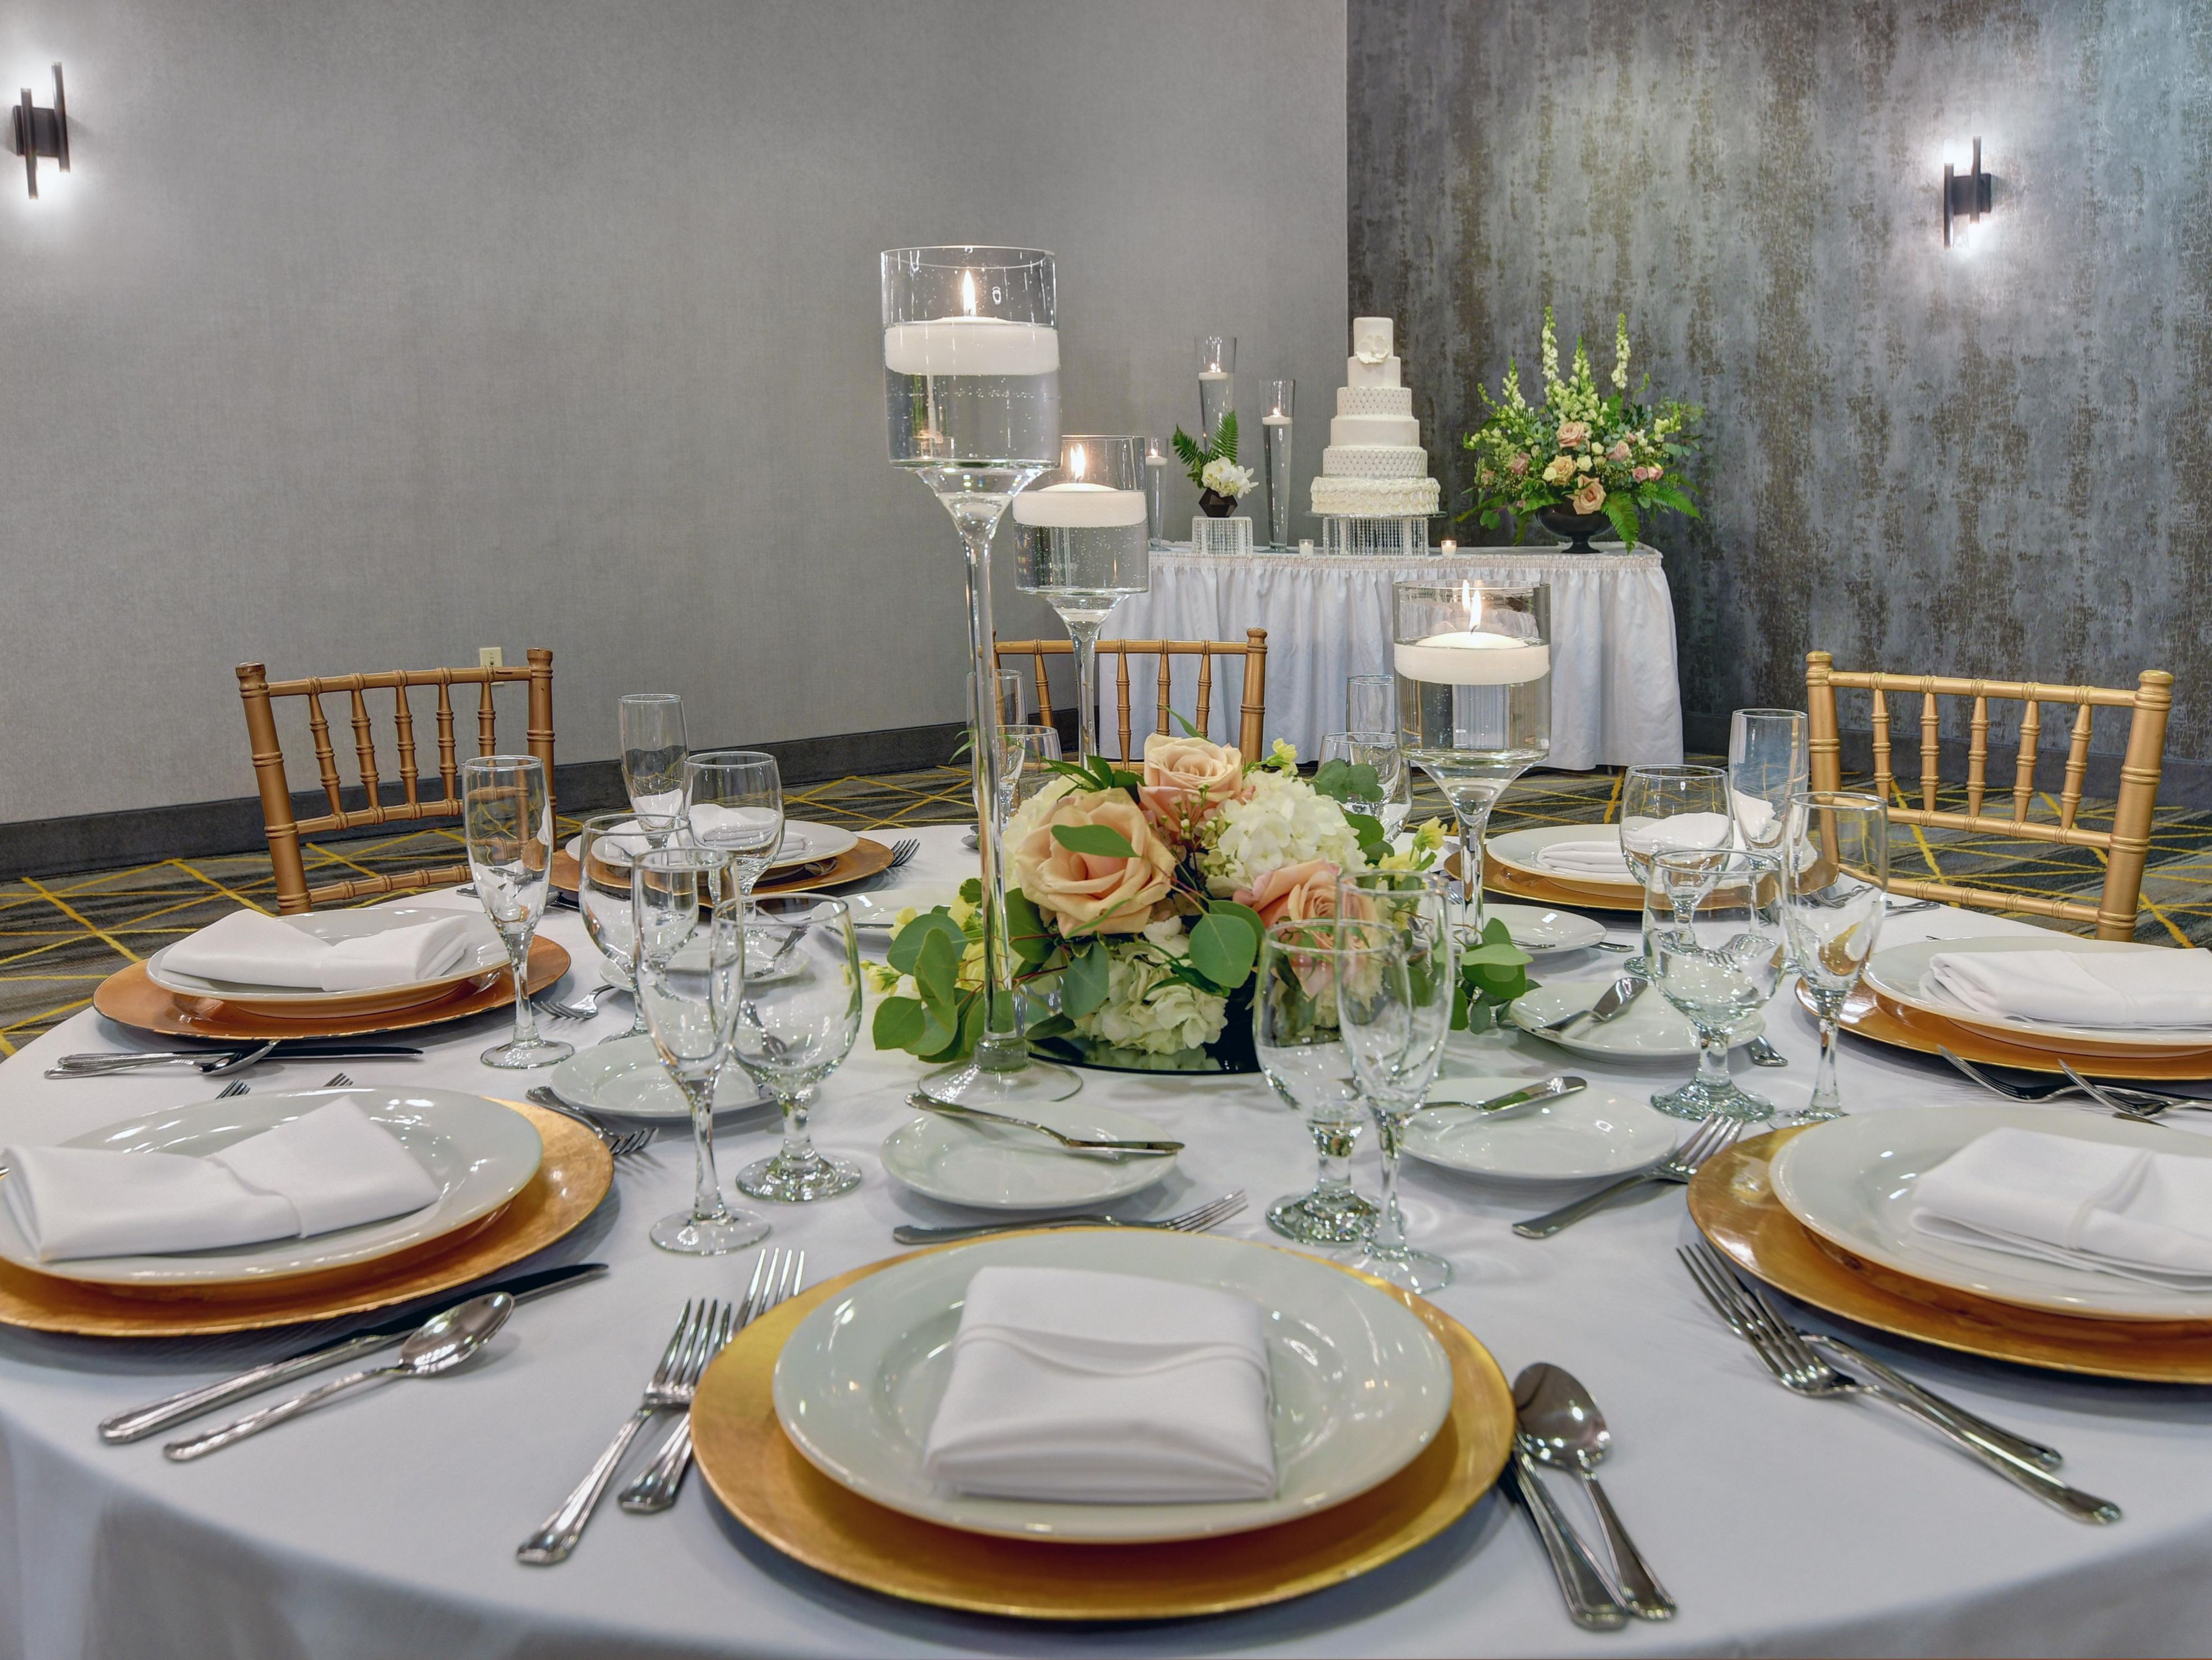 We cater to your needs at the Holiday Inn Philadelphia - Cherry Hill! Rehearsal Dinners, Ceremonies, Wedding Receptions, Post-Nuptials Brunches; whether big or small our team of professionals can do it all!